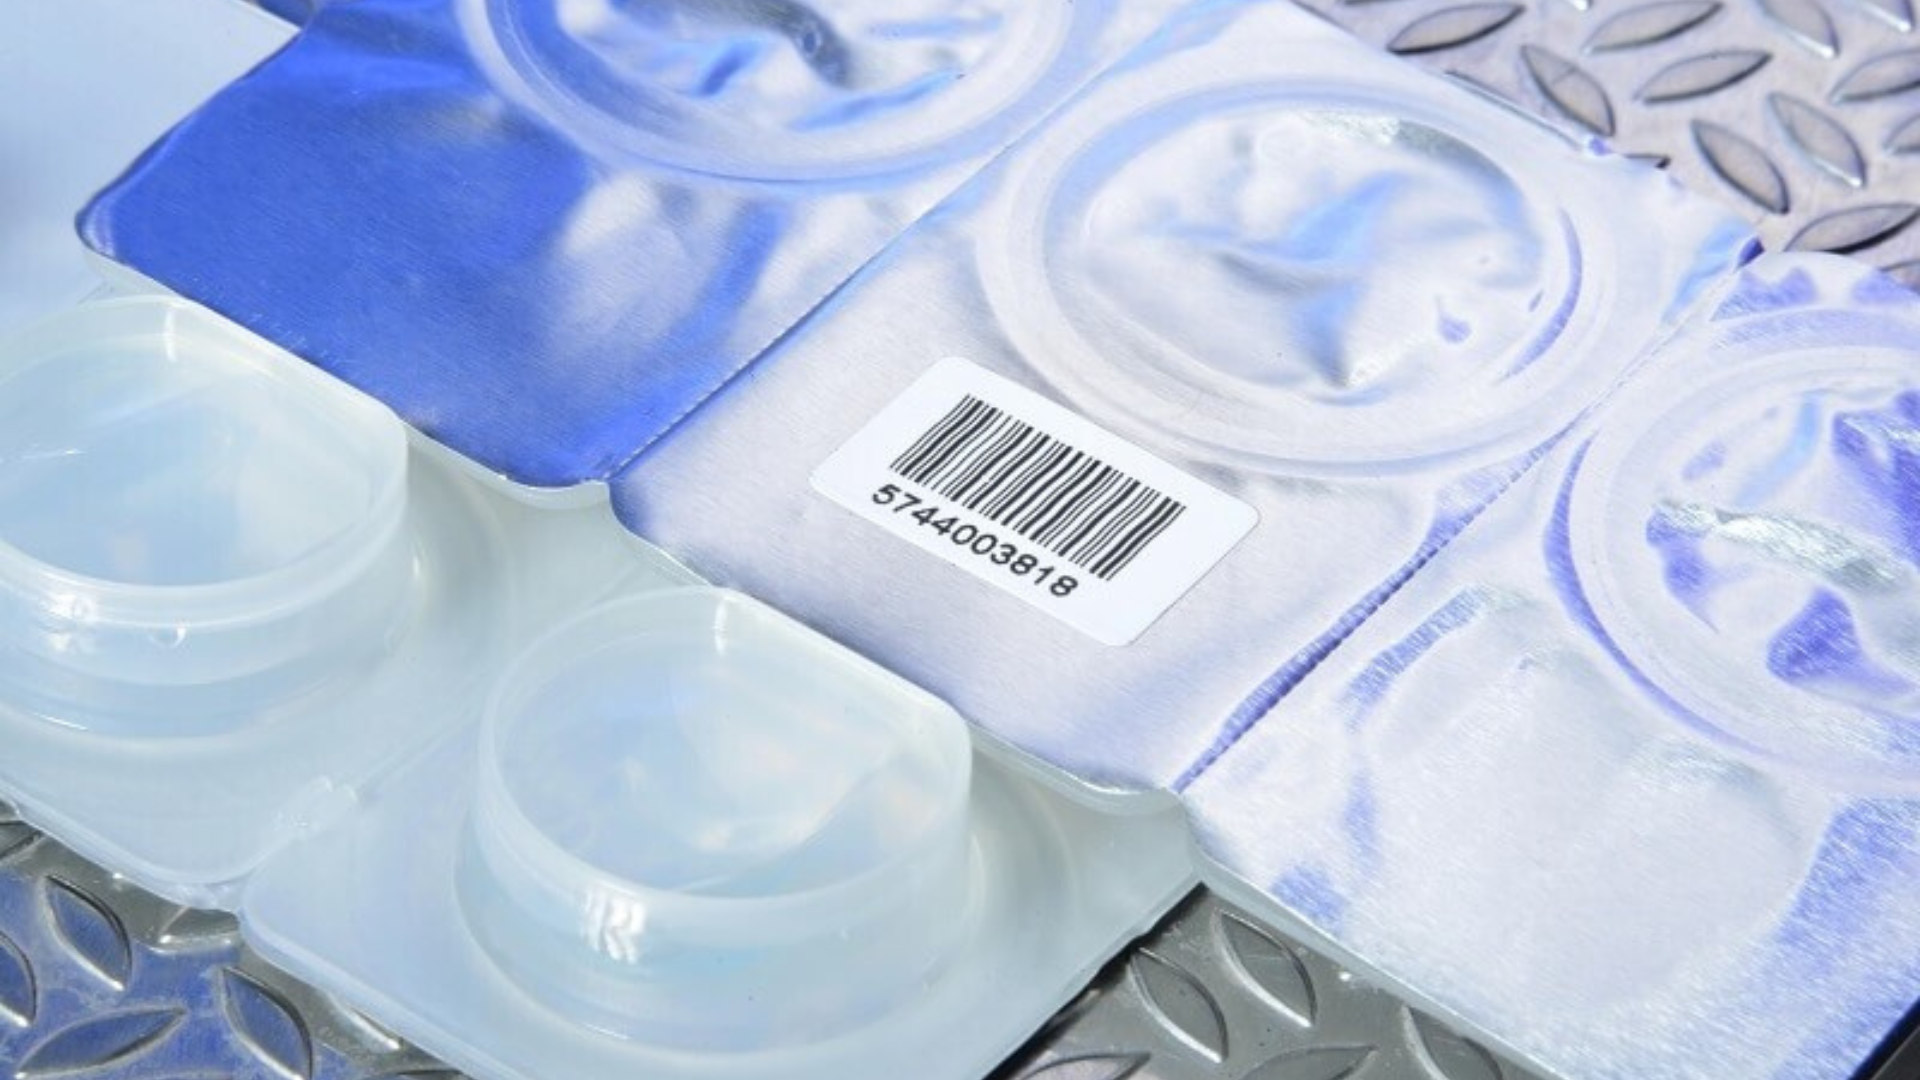 Thermal Transfer Coding for pharmaceutical packaging